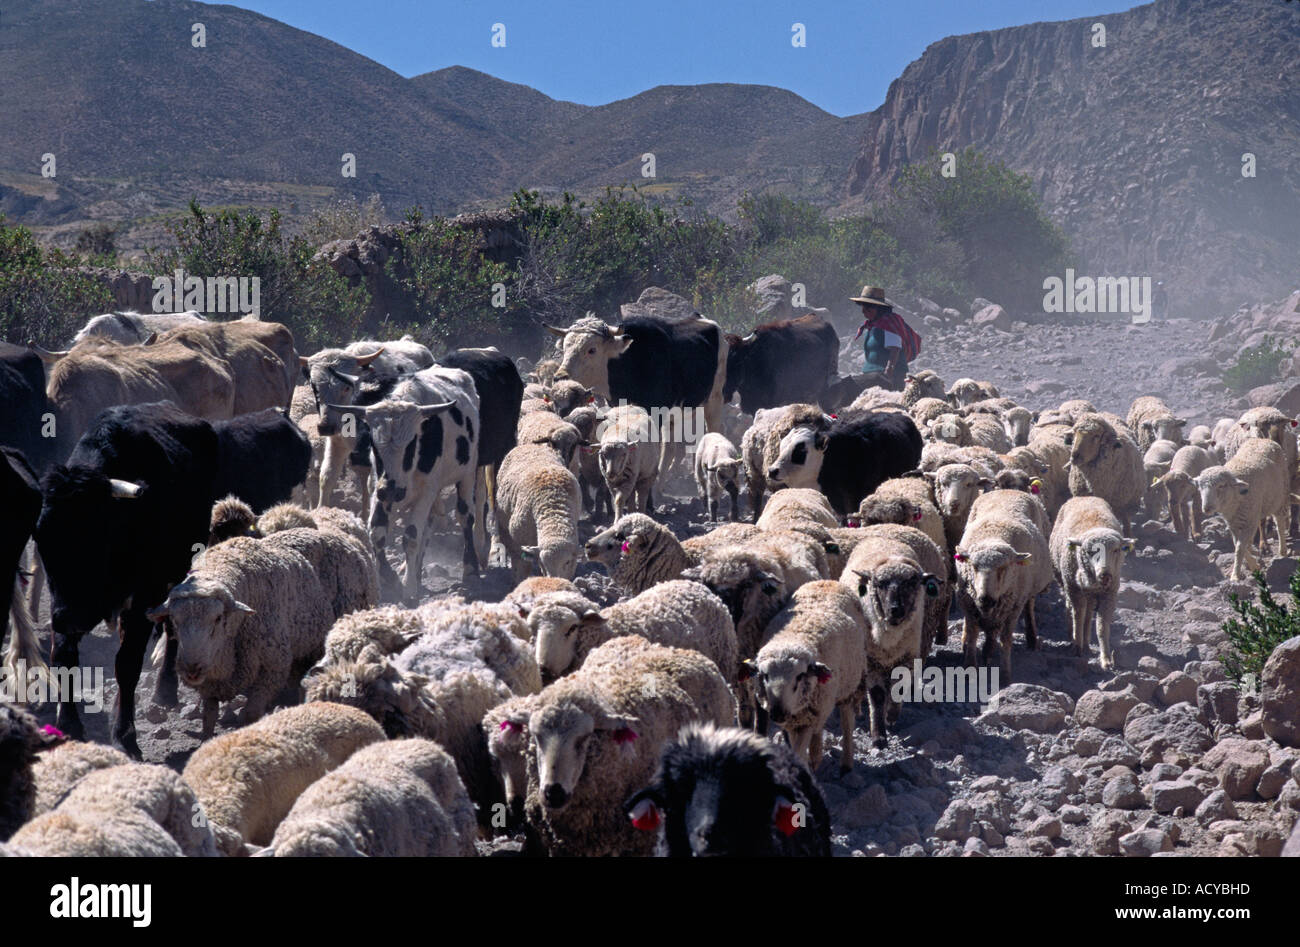 An AYMARA woman herds cattle sheep along a dirt road near the village of PUTRE NORTHERN CHILE Stock Photo